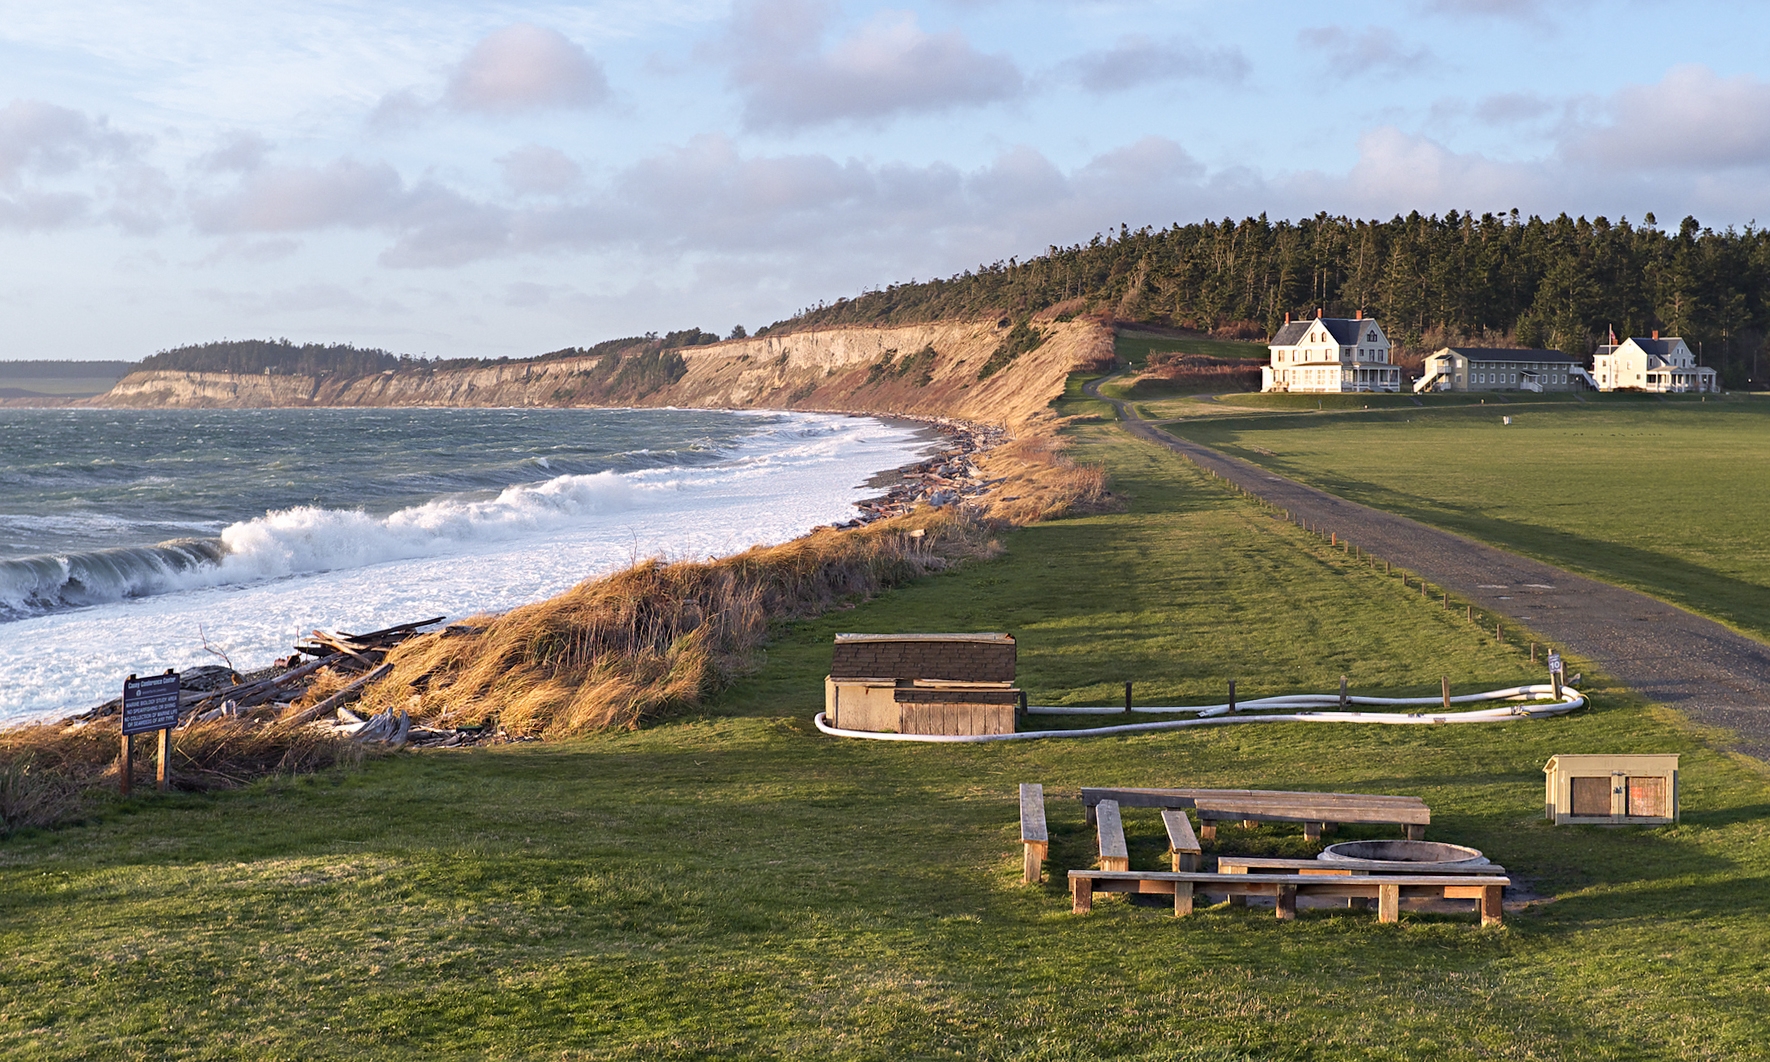 Where to stay on whidbey island